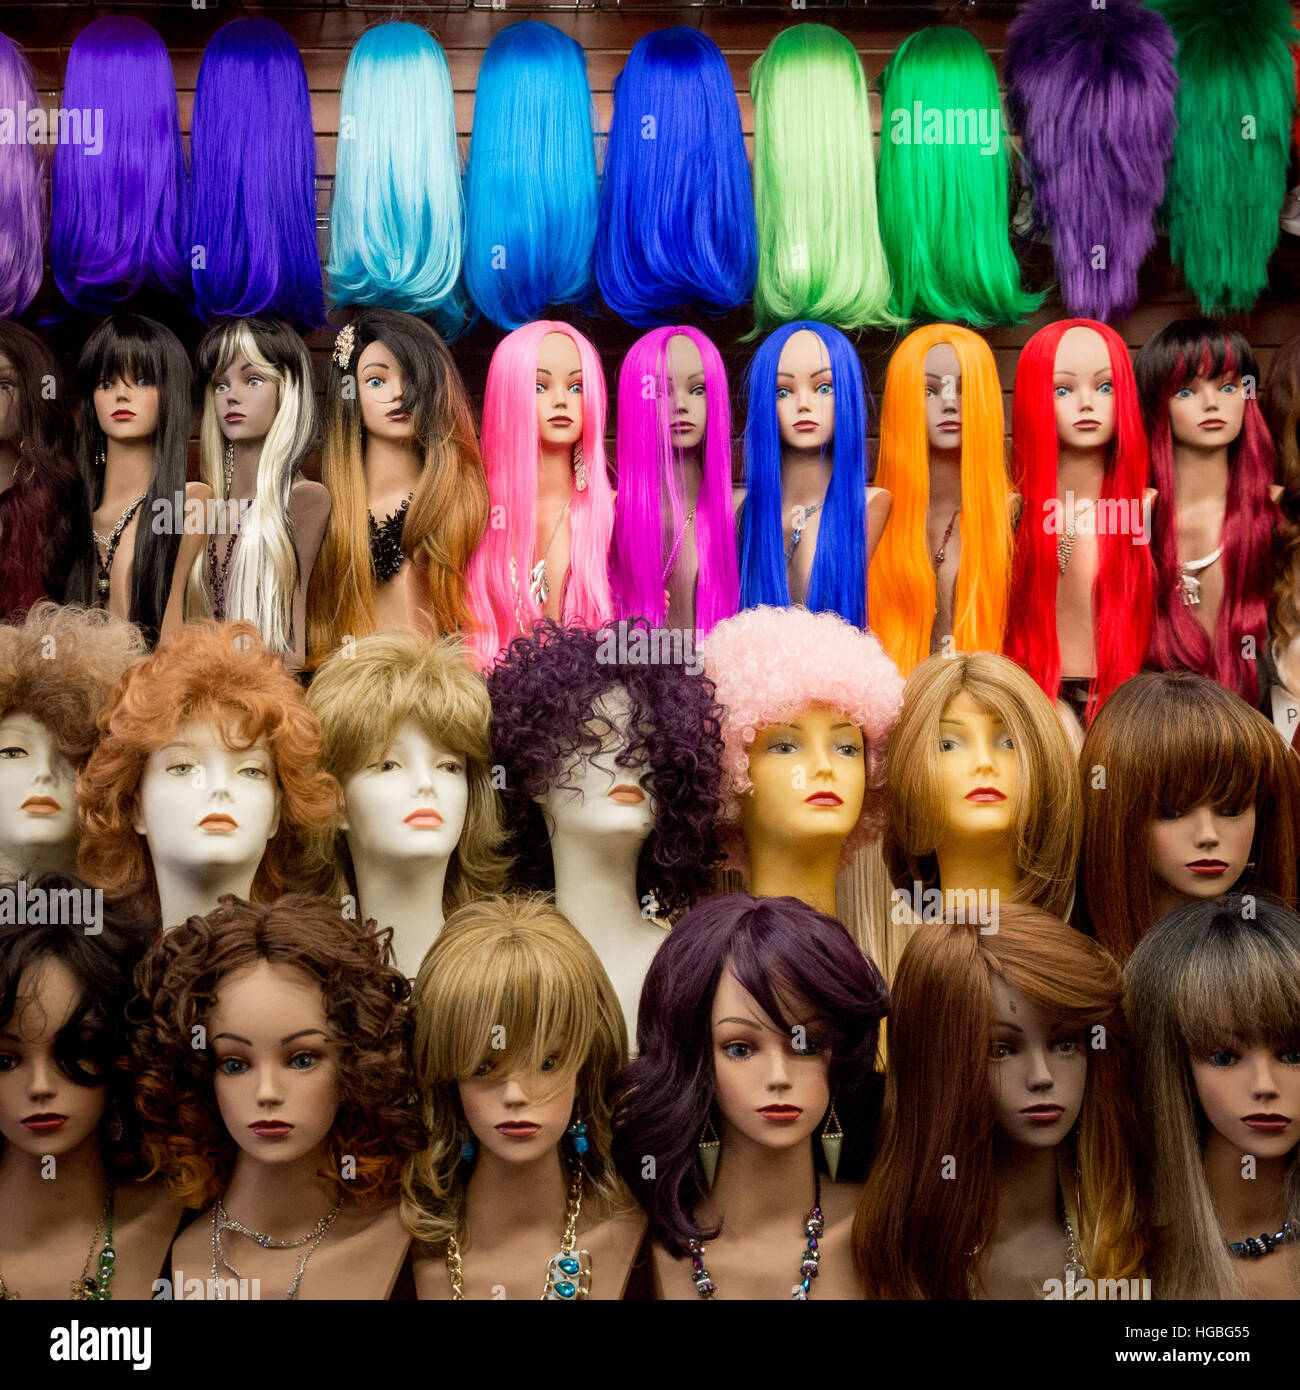 Vividly colorful wigs on mannequin heads inside a shop in the Fashion District, Los Angeles, California. Stock Photo